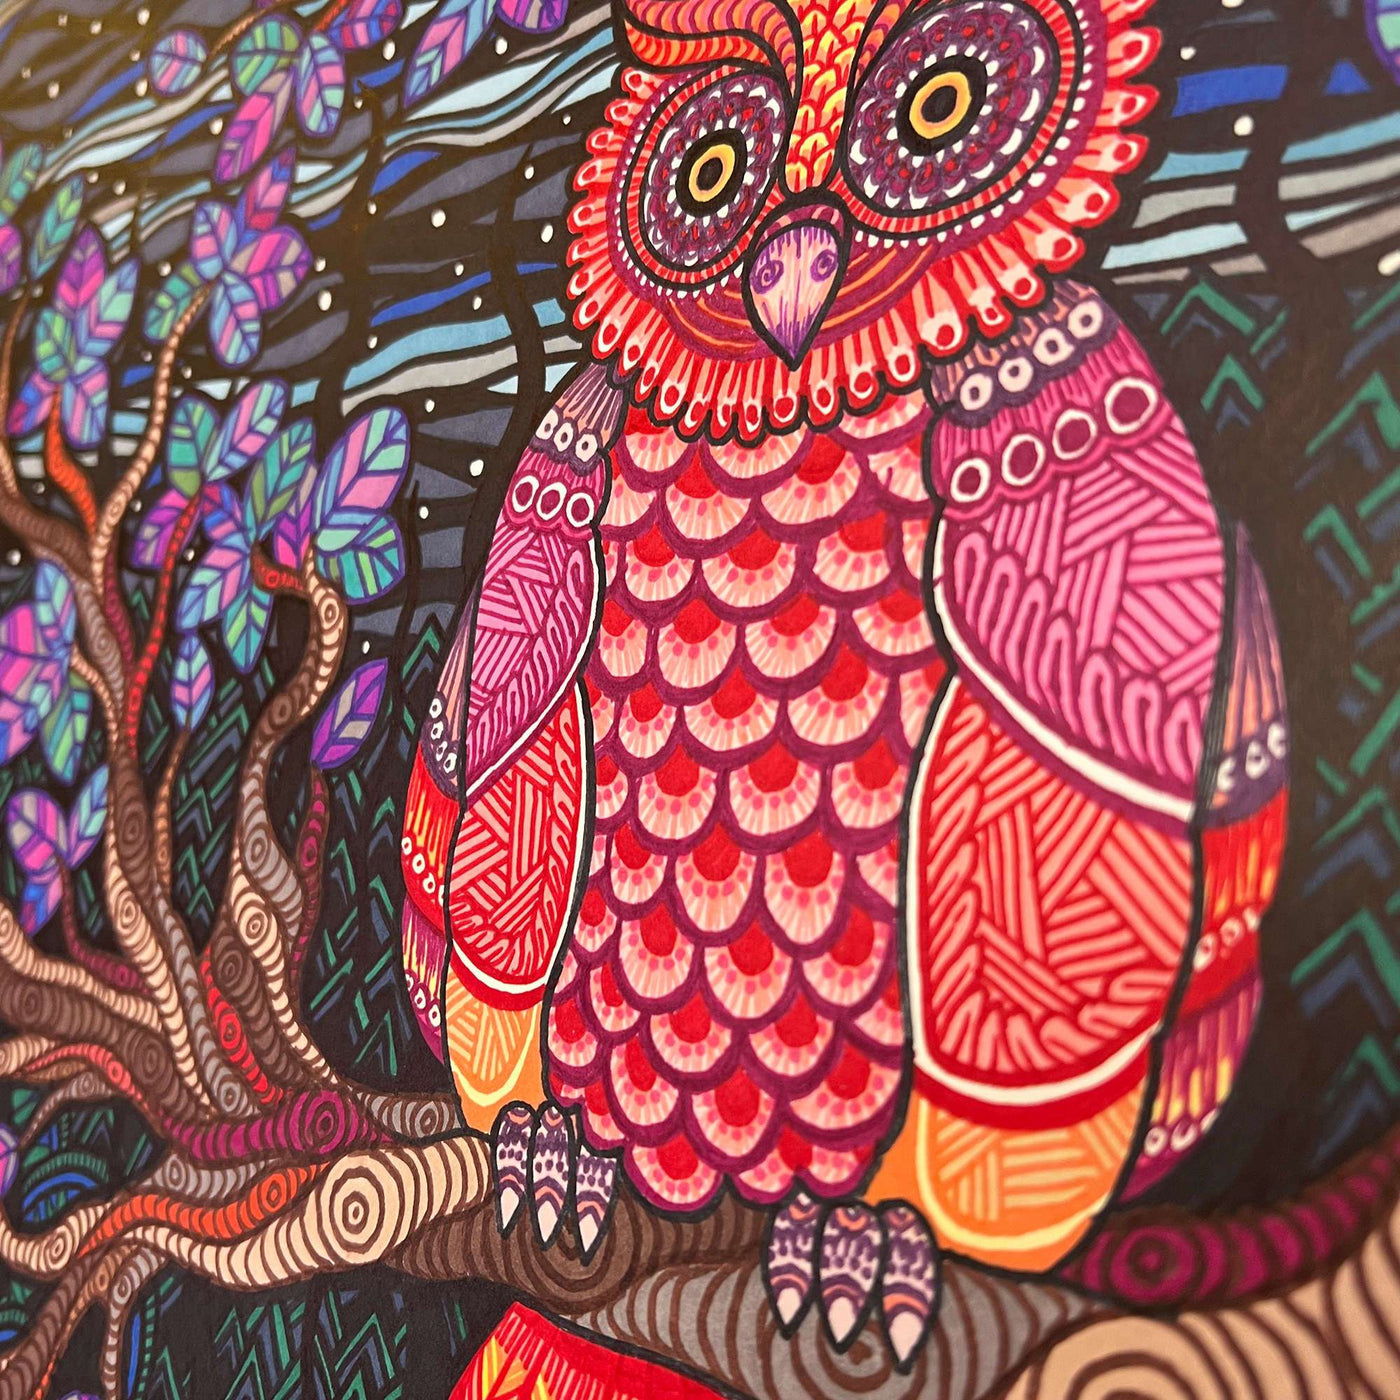 Closeup of the vibrant Owl Tree Original Marker Painting, featuring intricate zentangles and a rich array of colors.